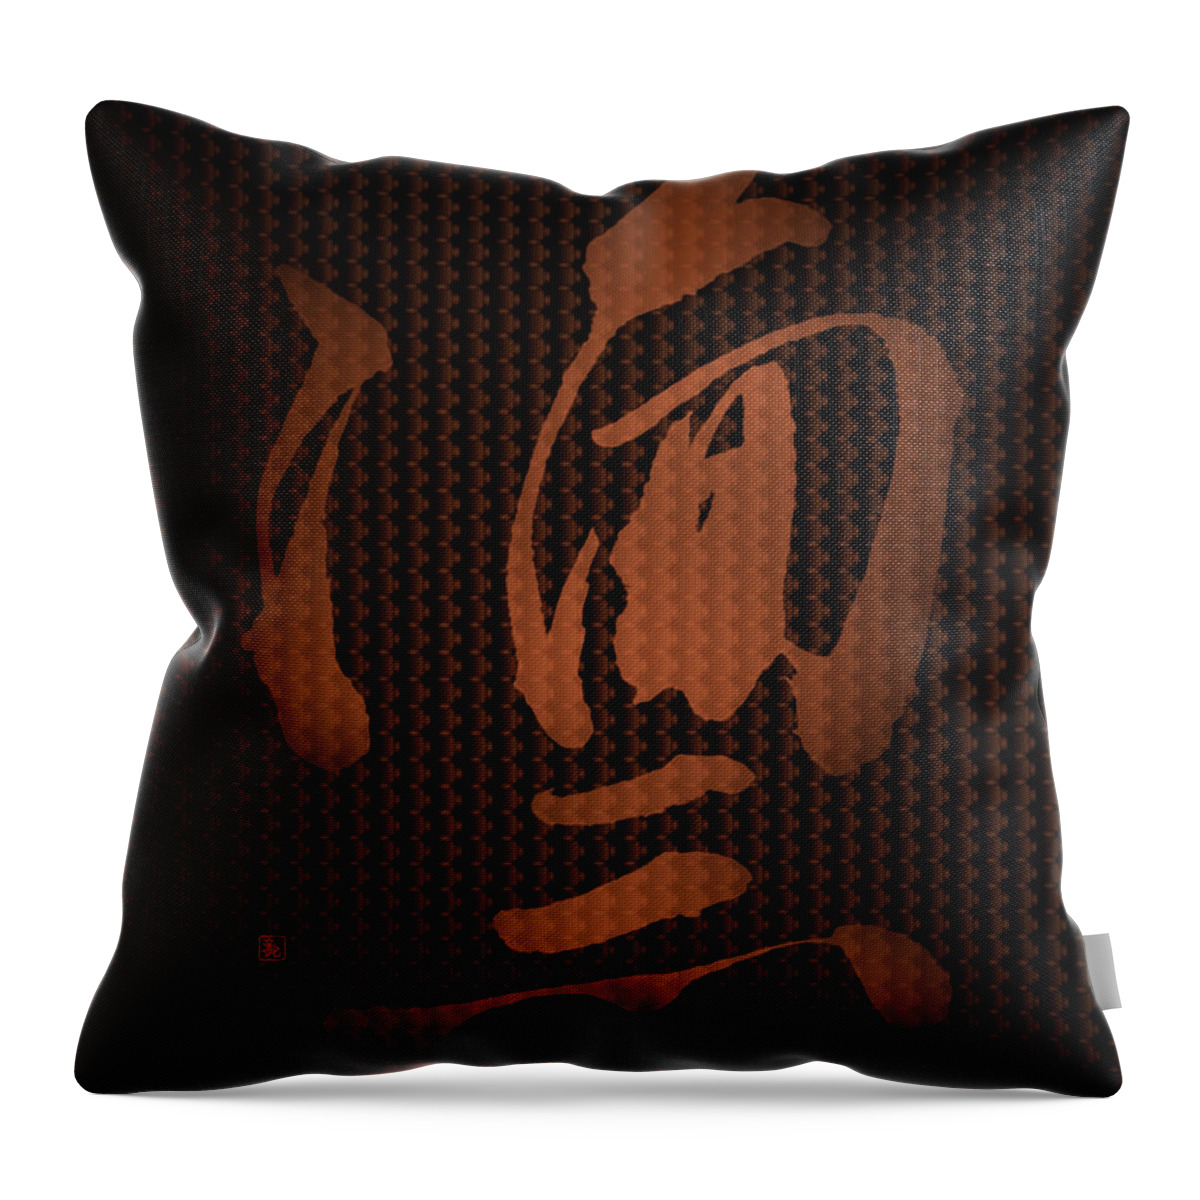 Dignified Throw Pillow featuring the painting Dignified by Ponte Ryuurui